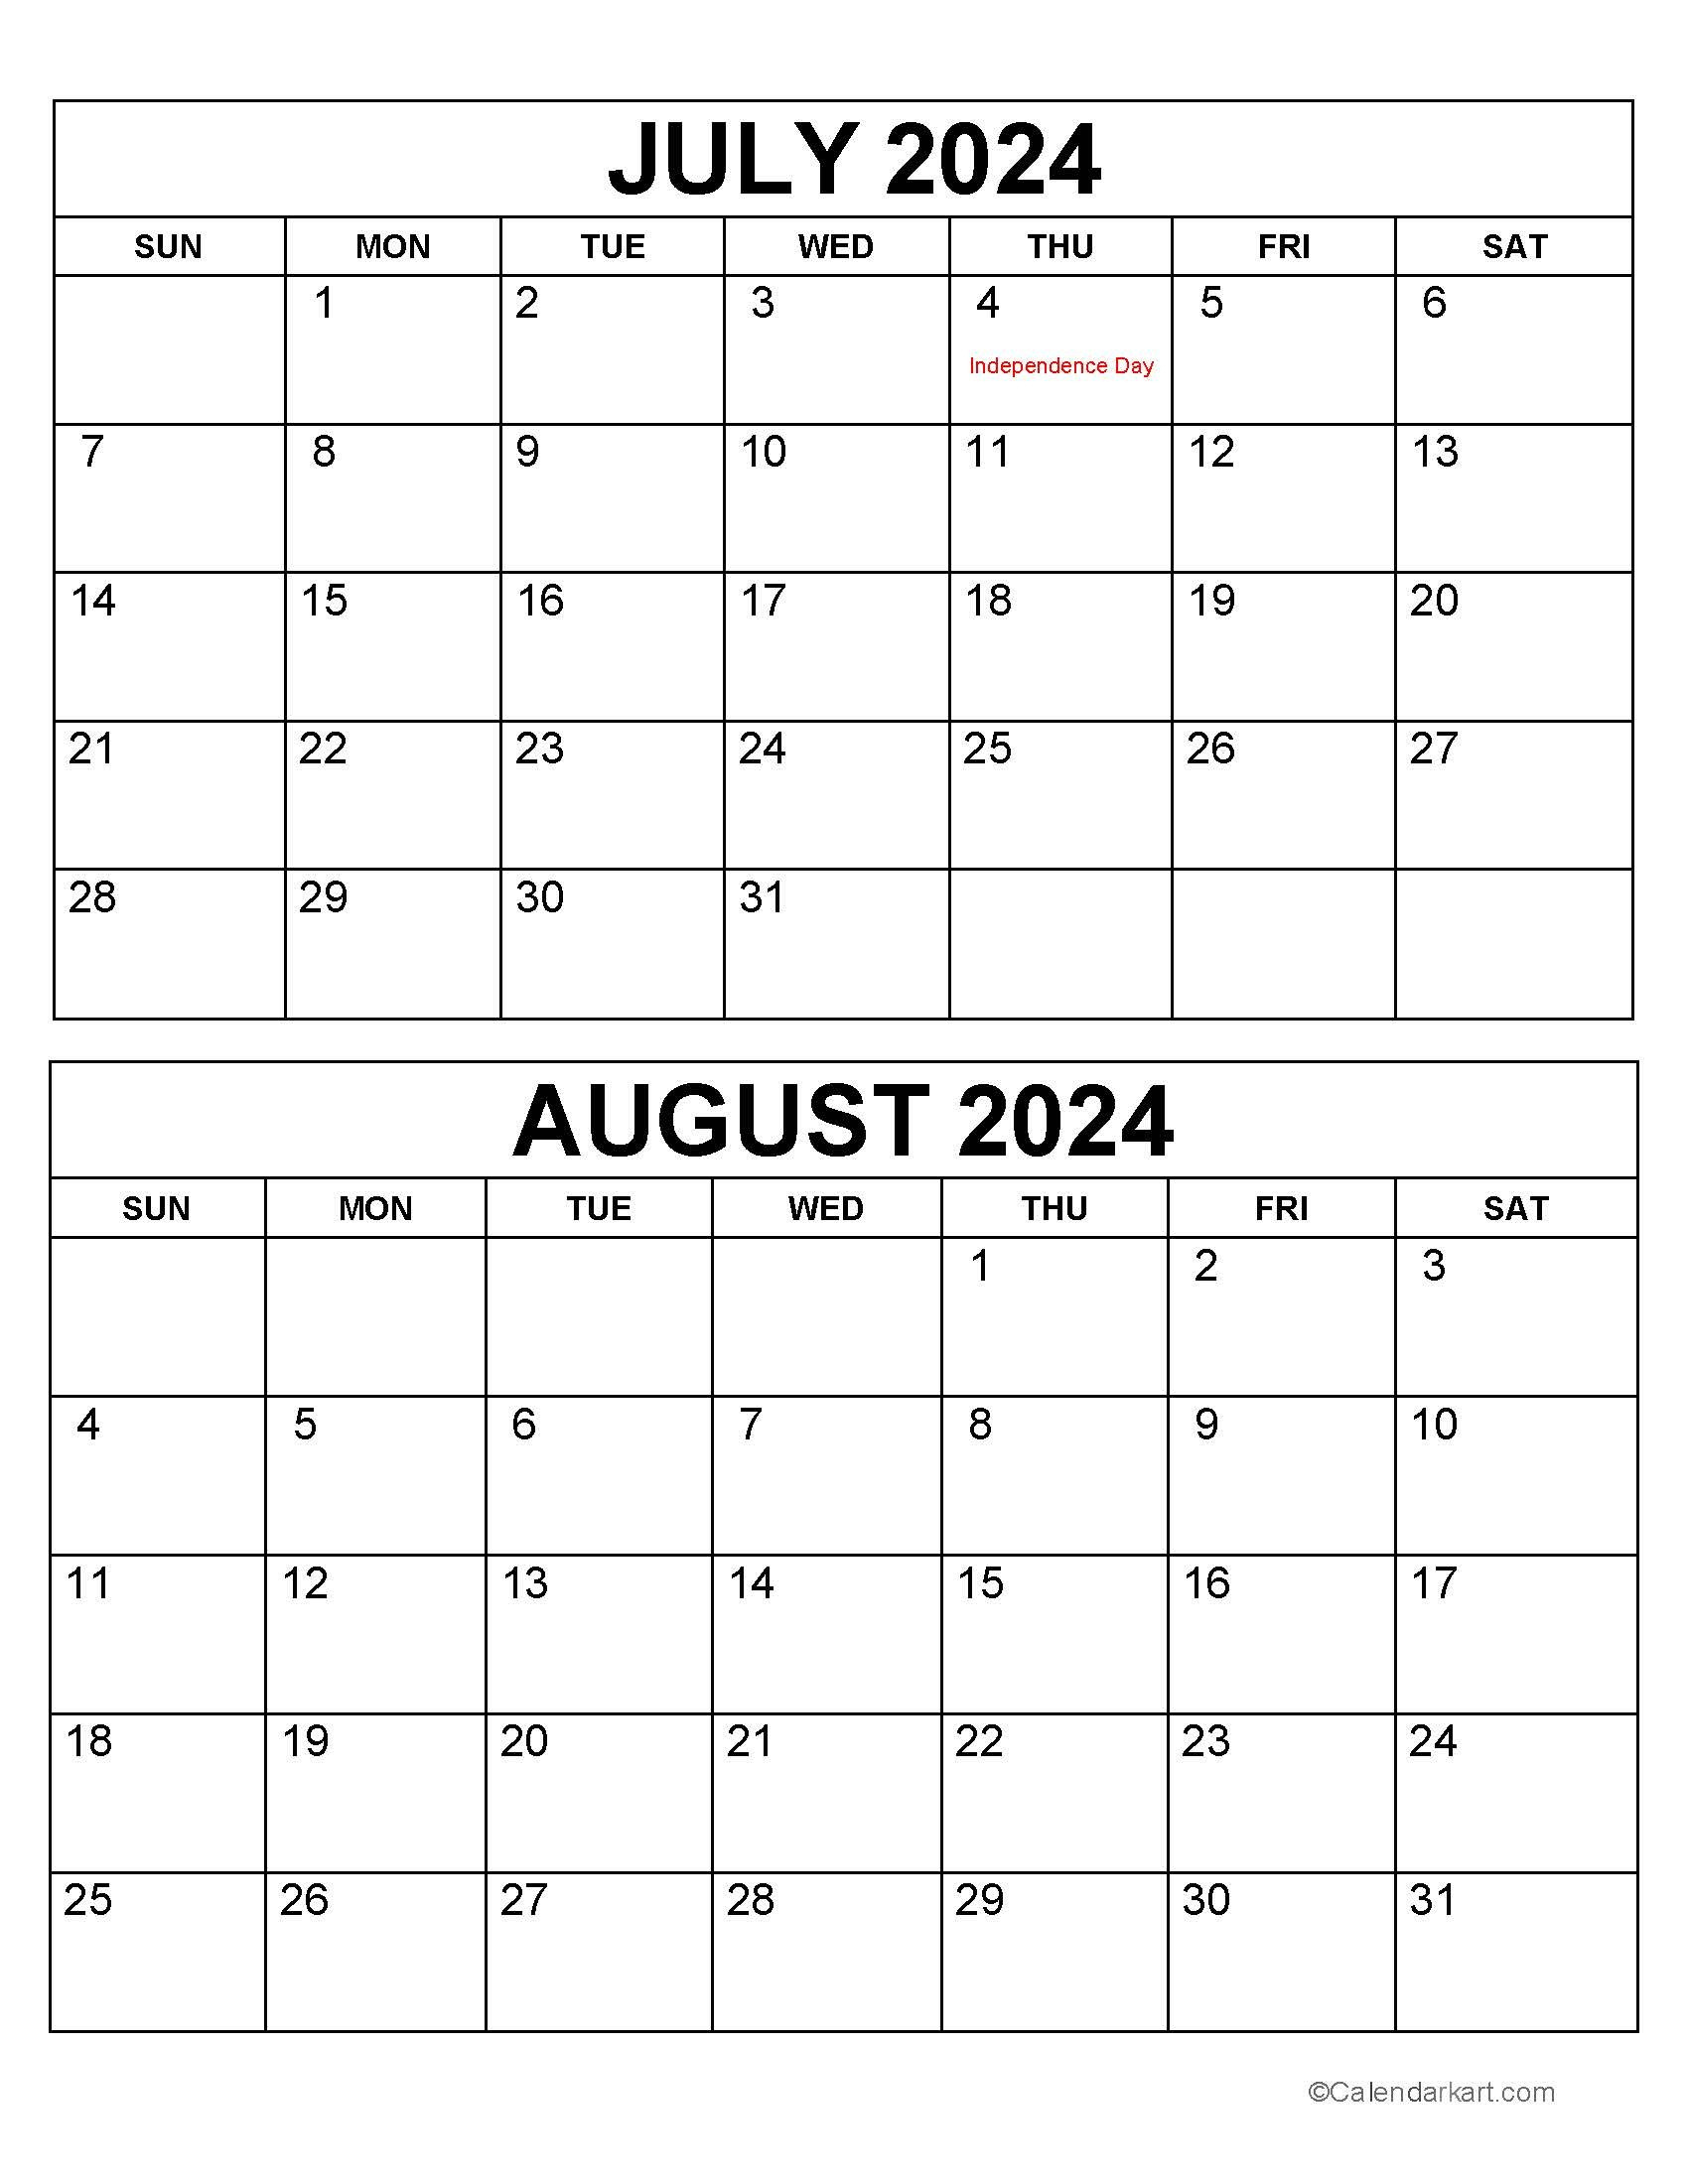 Printable July August 2024 Calendar | Calendarkart within Calendar of July and August 2024